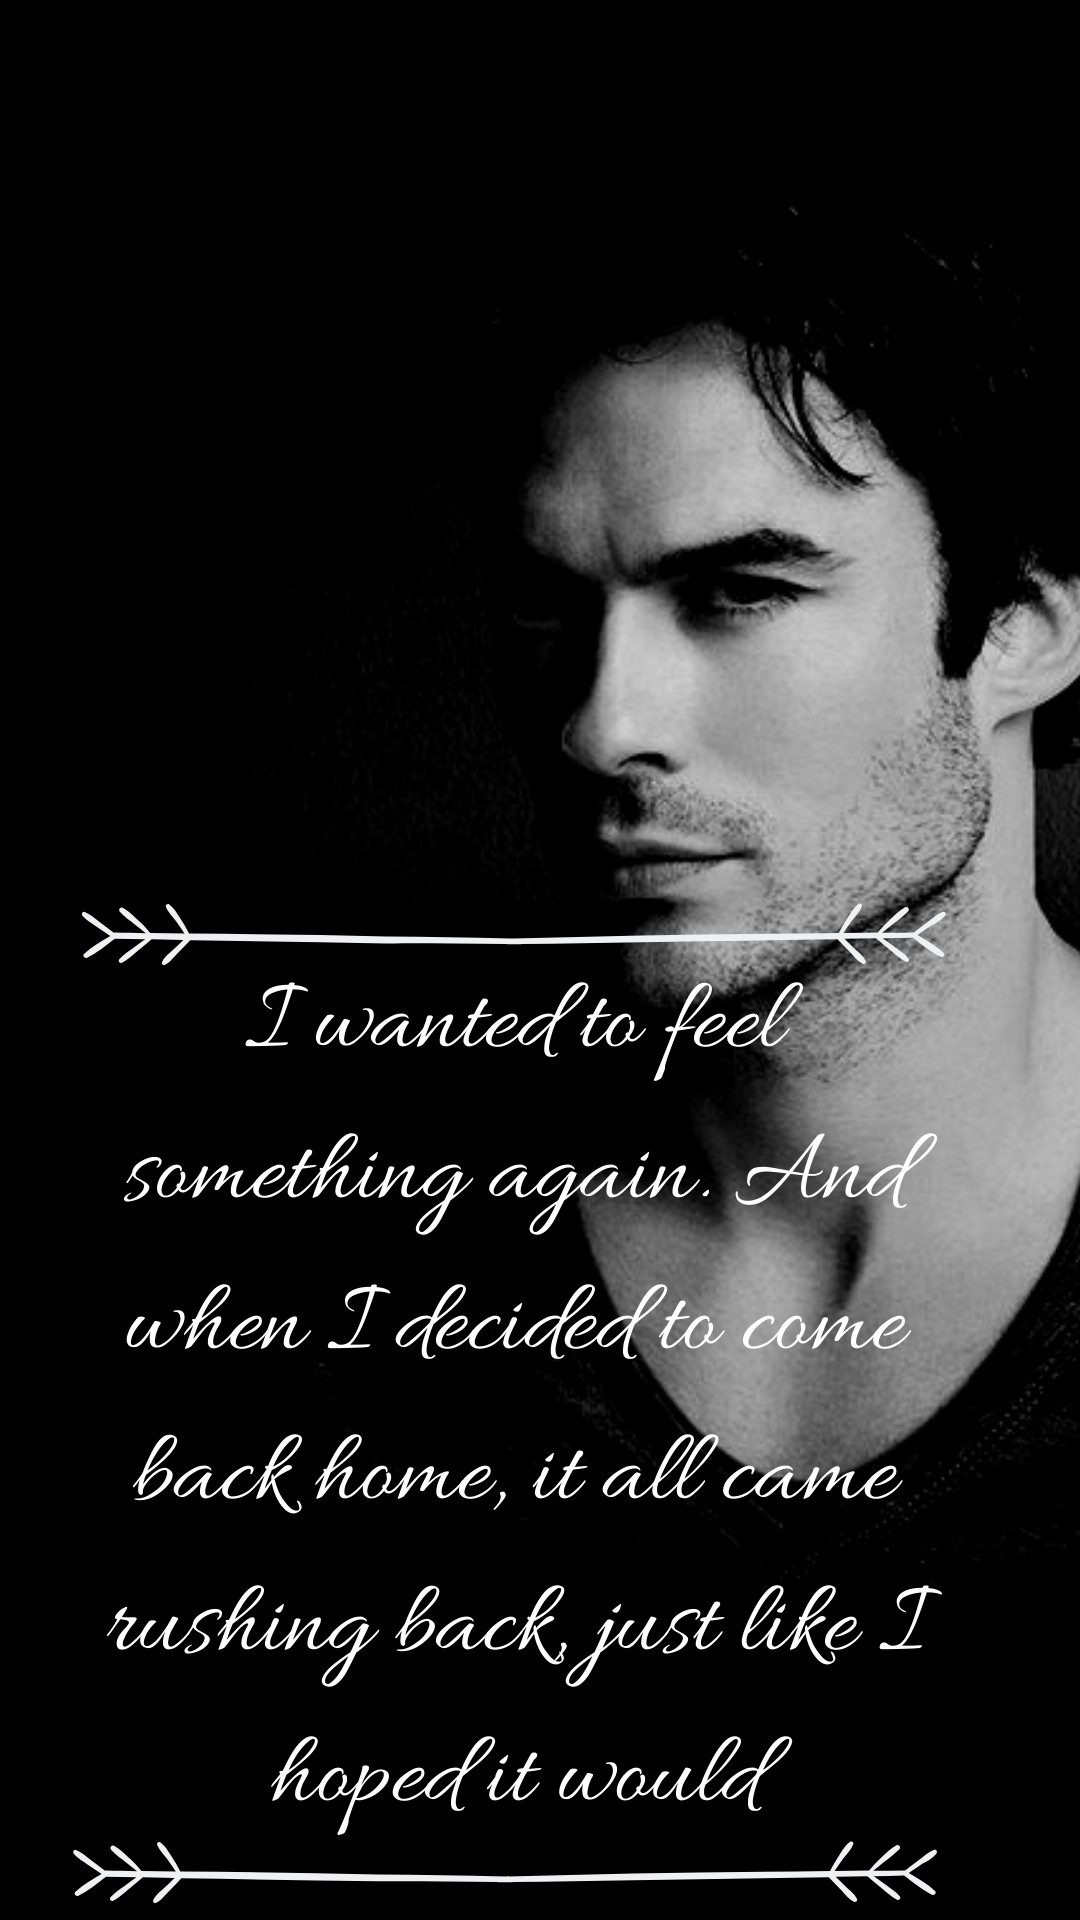 Damon Salvatore Funny Quotes
 8 Amazing Damon Salvatore Quotes That You Can Use As Phone